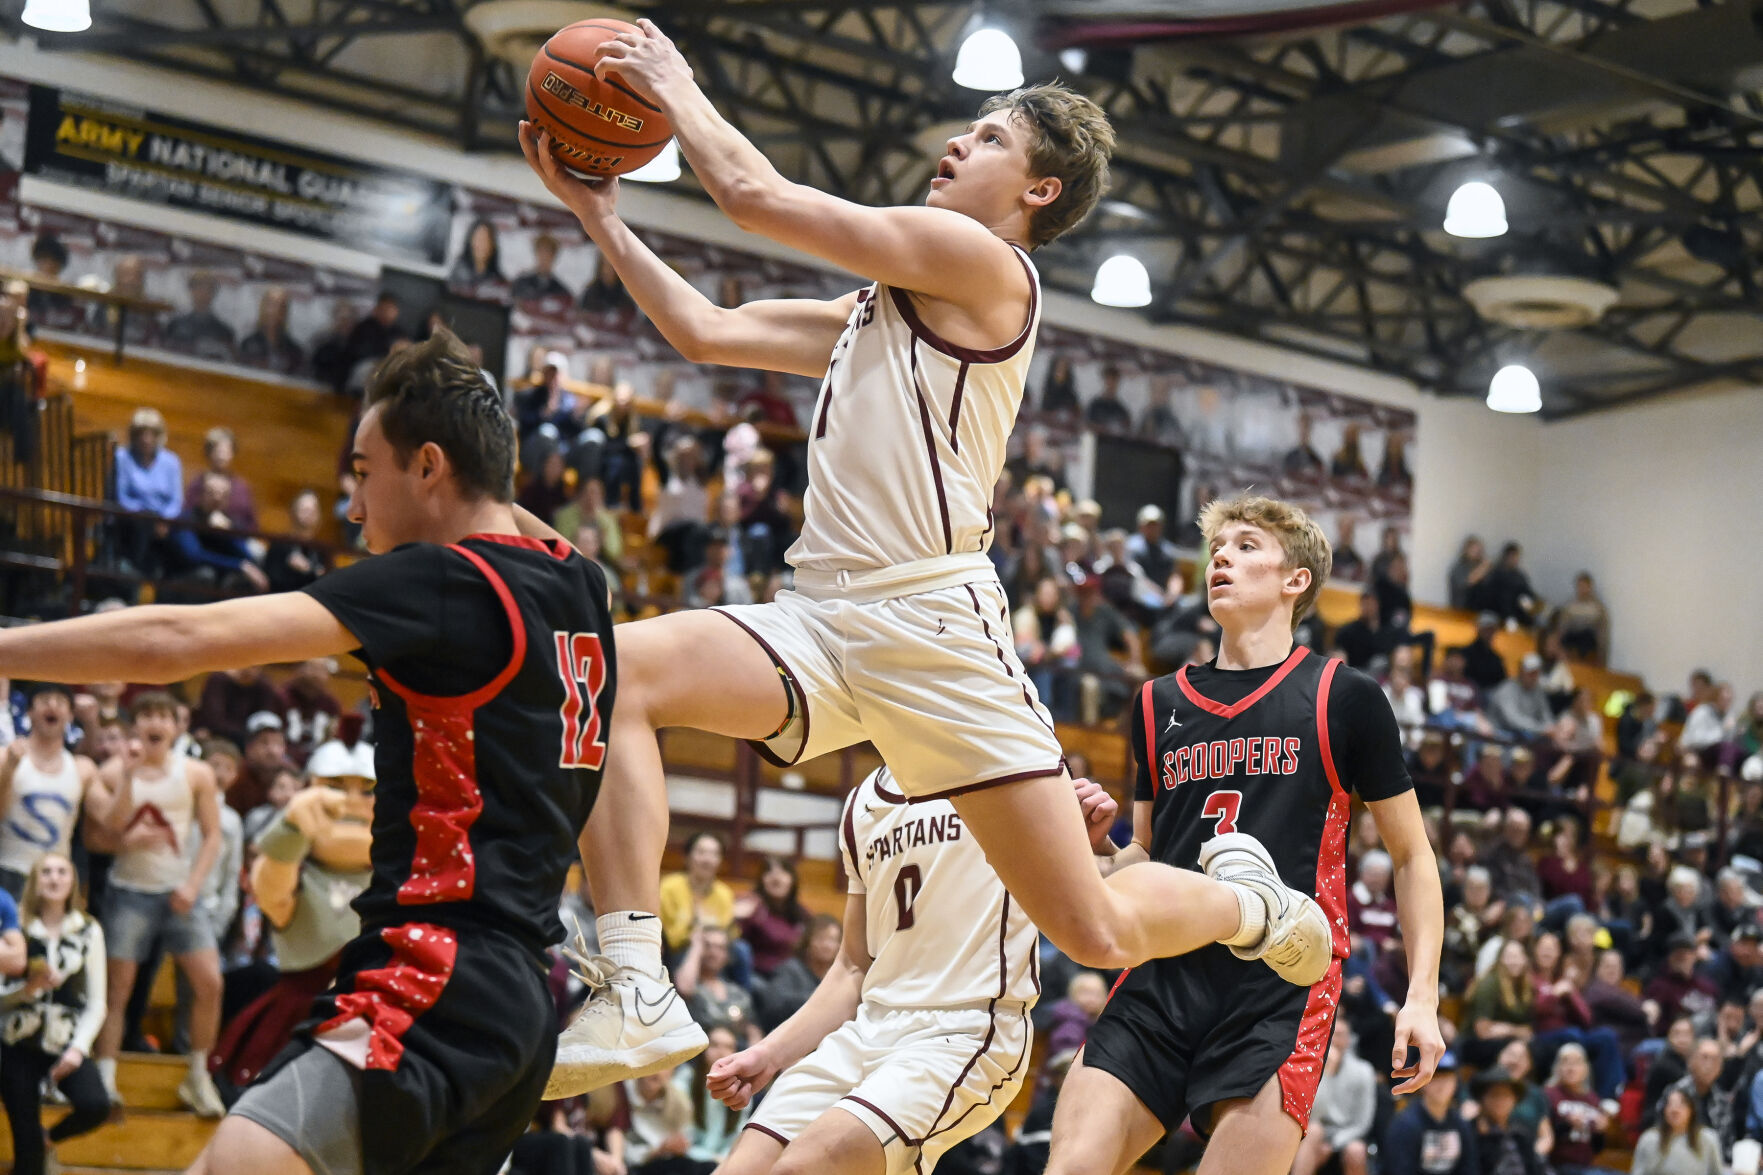 Spearfish makes a remarkable comeback to defeat Sturgis Brown in an intense overtime showdown